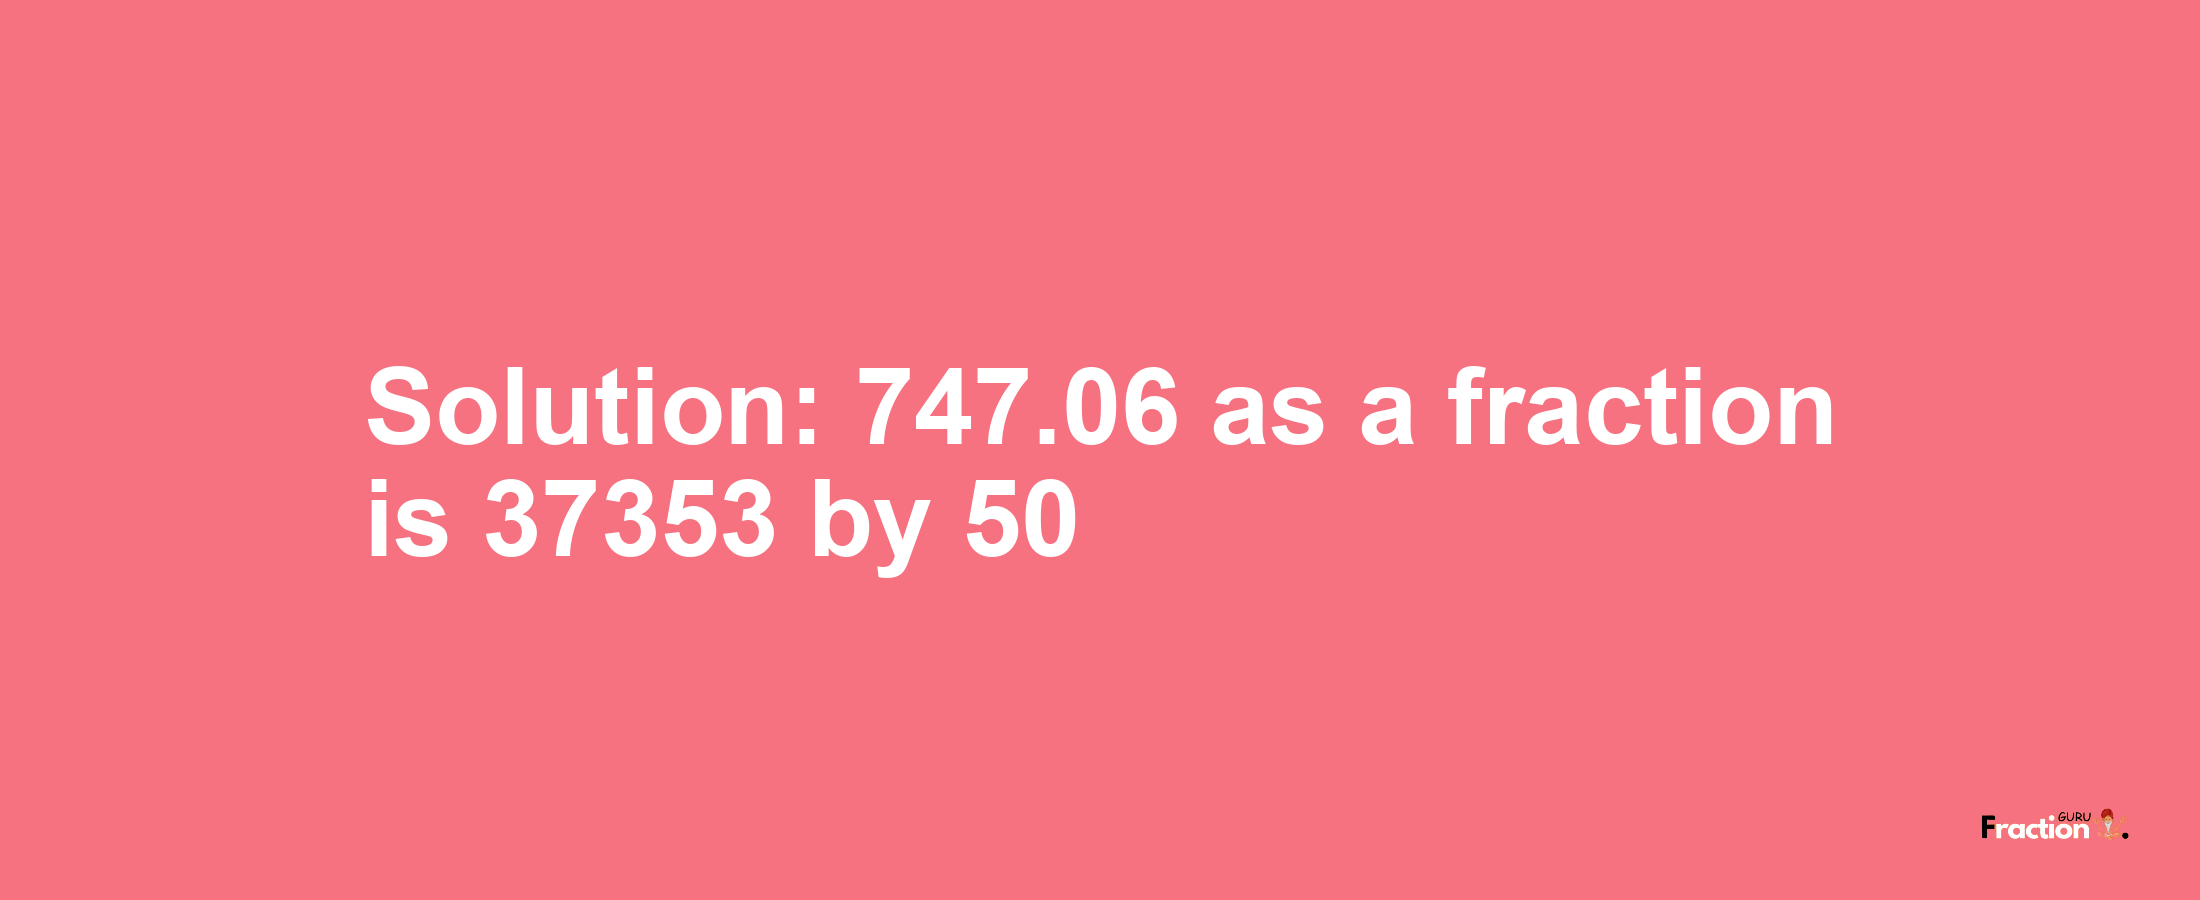 Solution:747.06 as a fraction is 37353/50